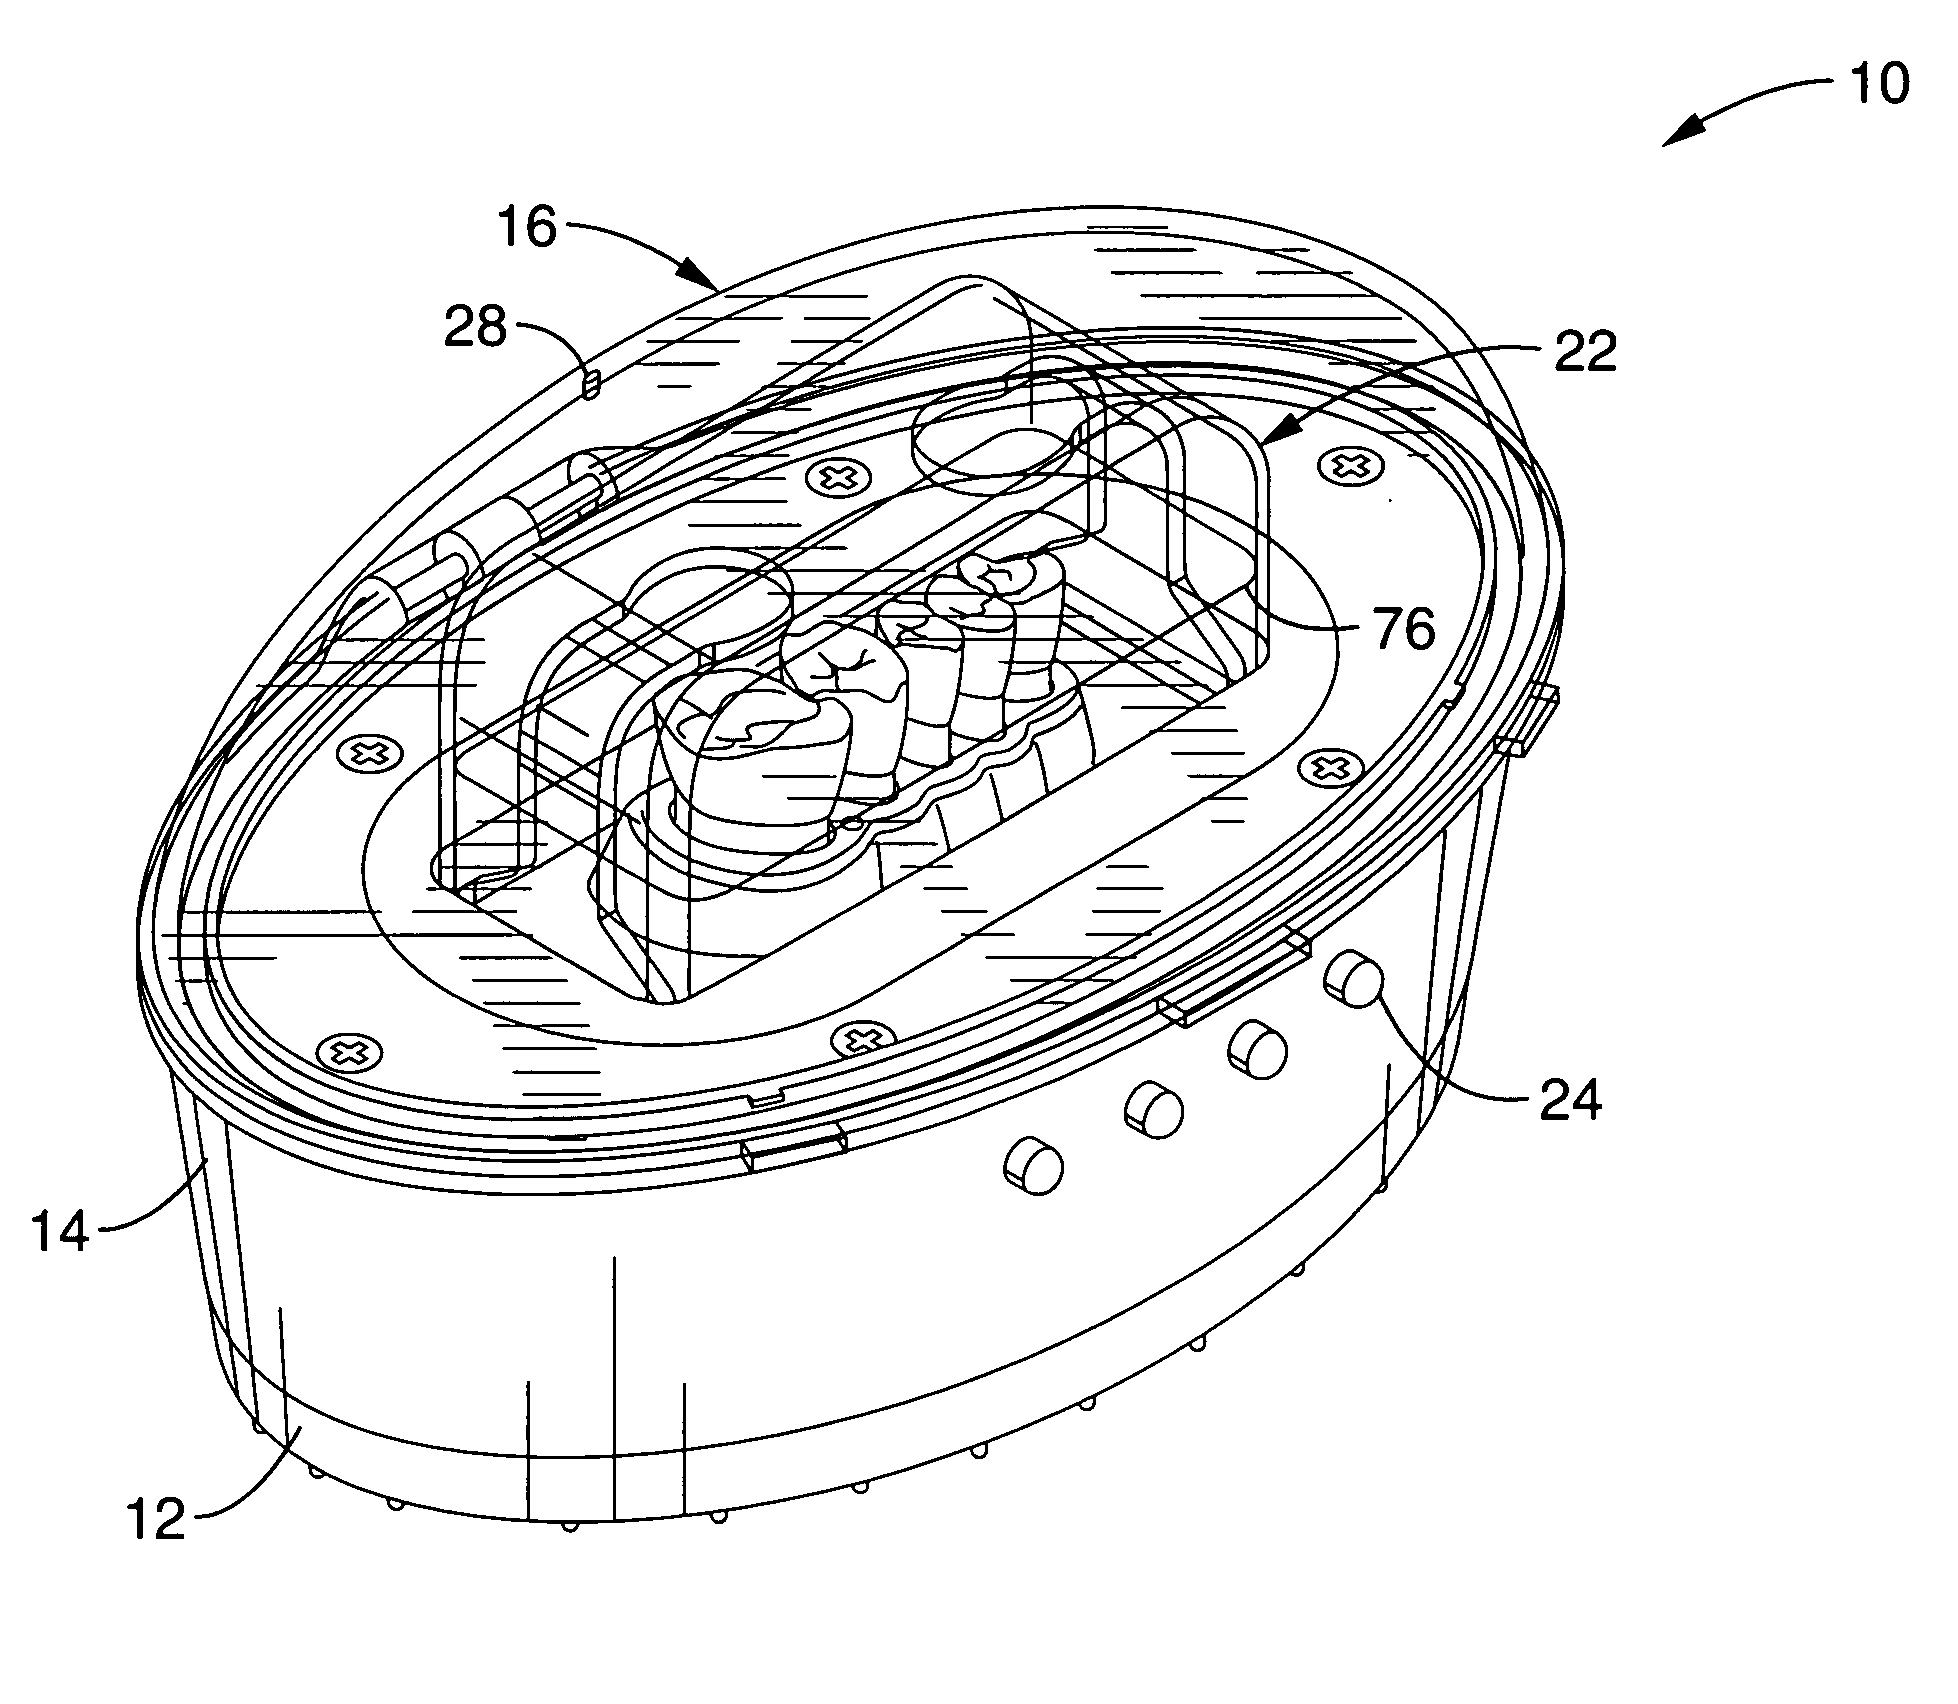 Pod apparatus for education and amusement